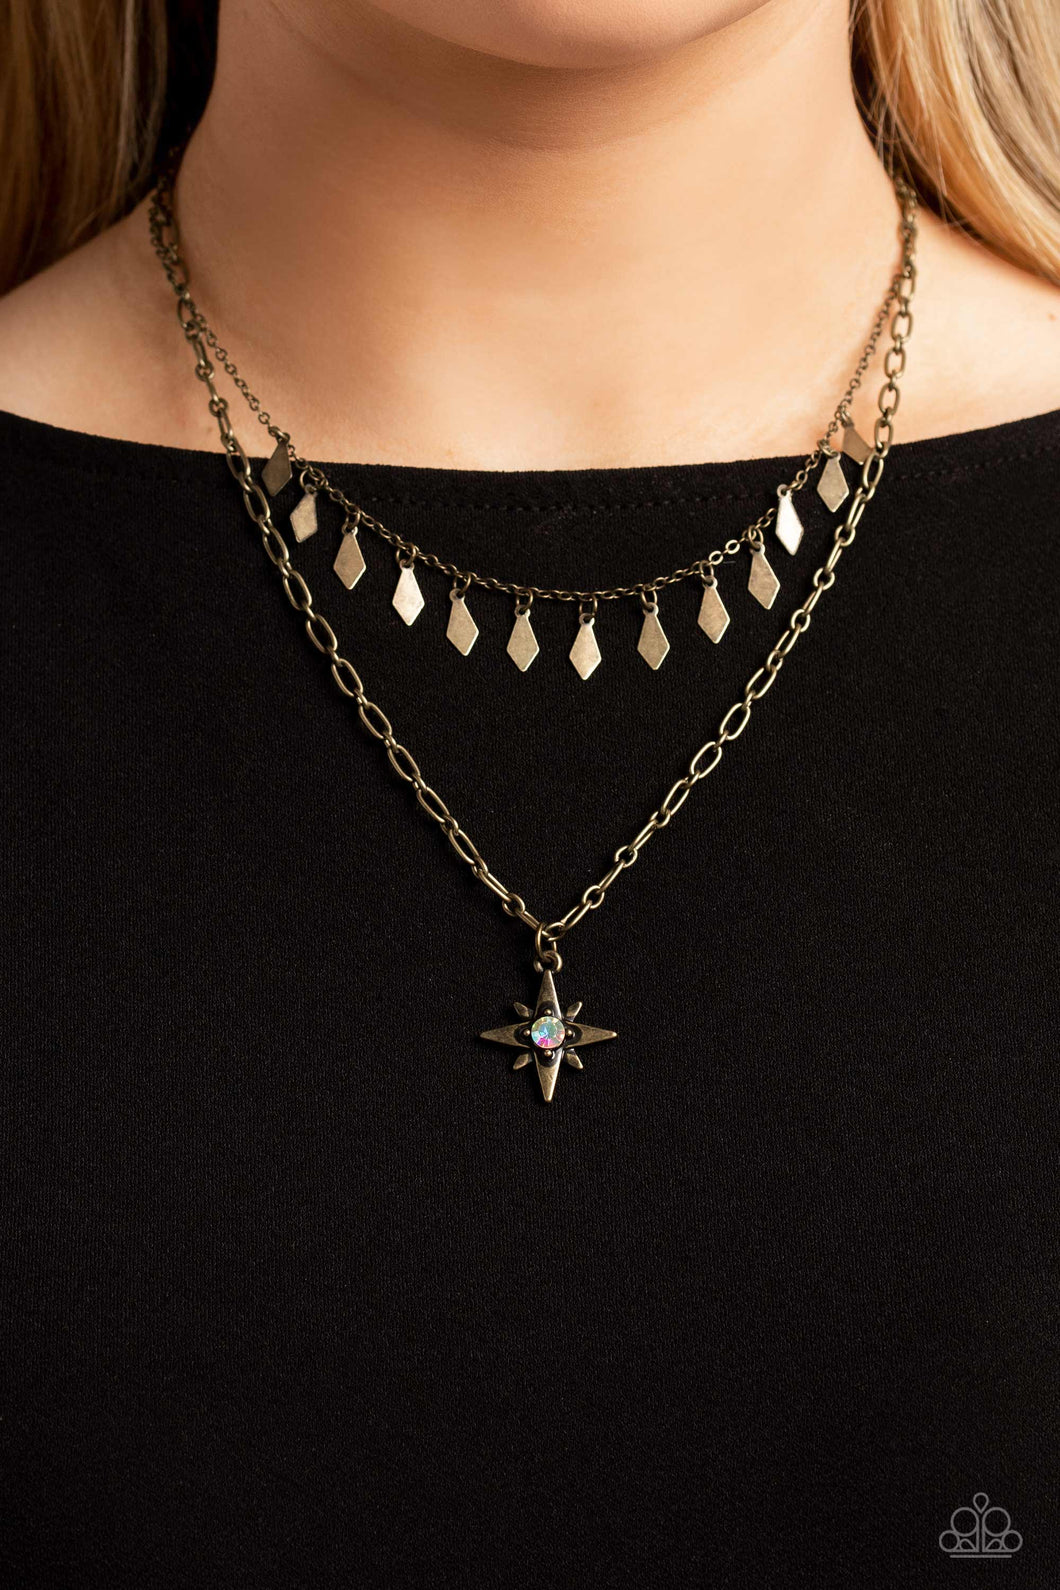 Paparazzi Accessories: The Second Star To The LIGHT - Brass Iridescent Patriotic Necklace